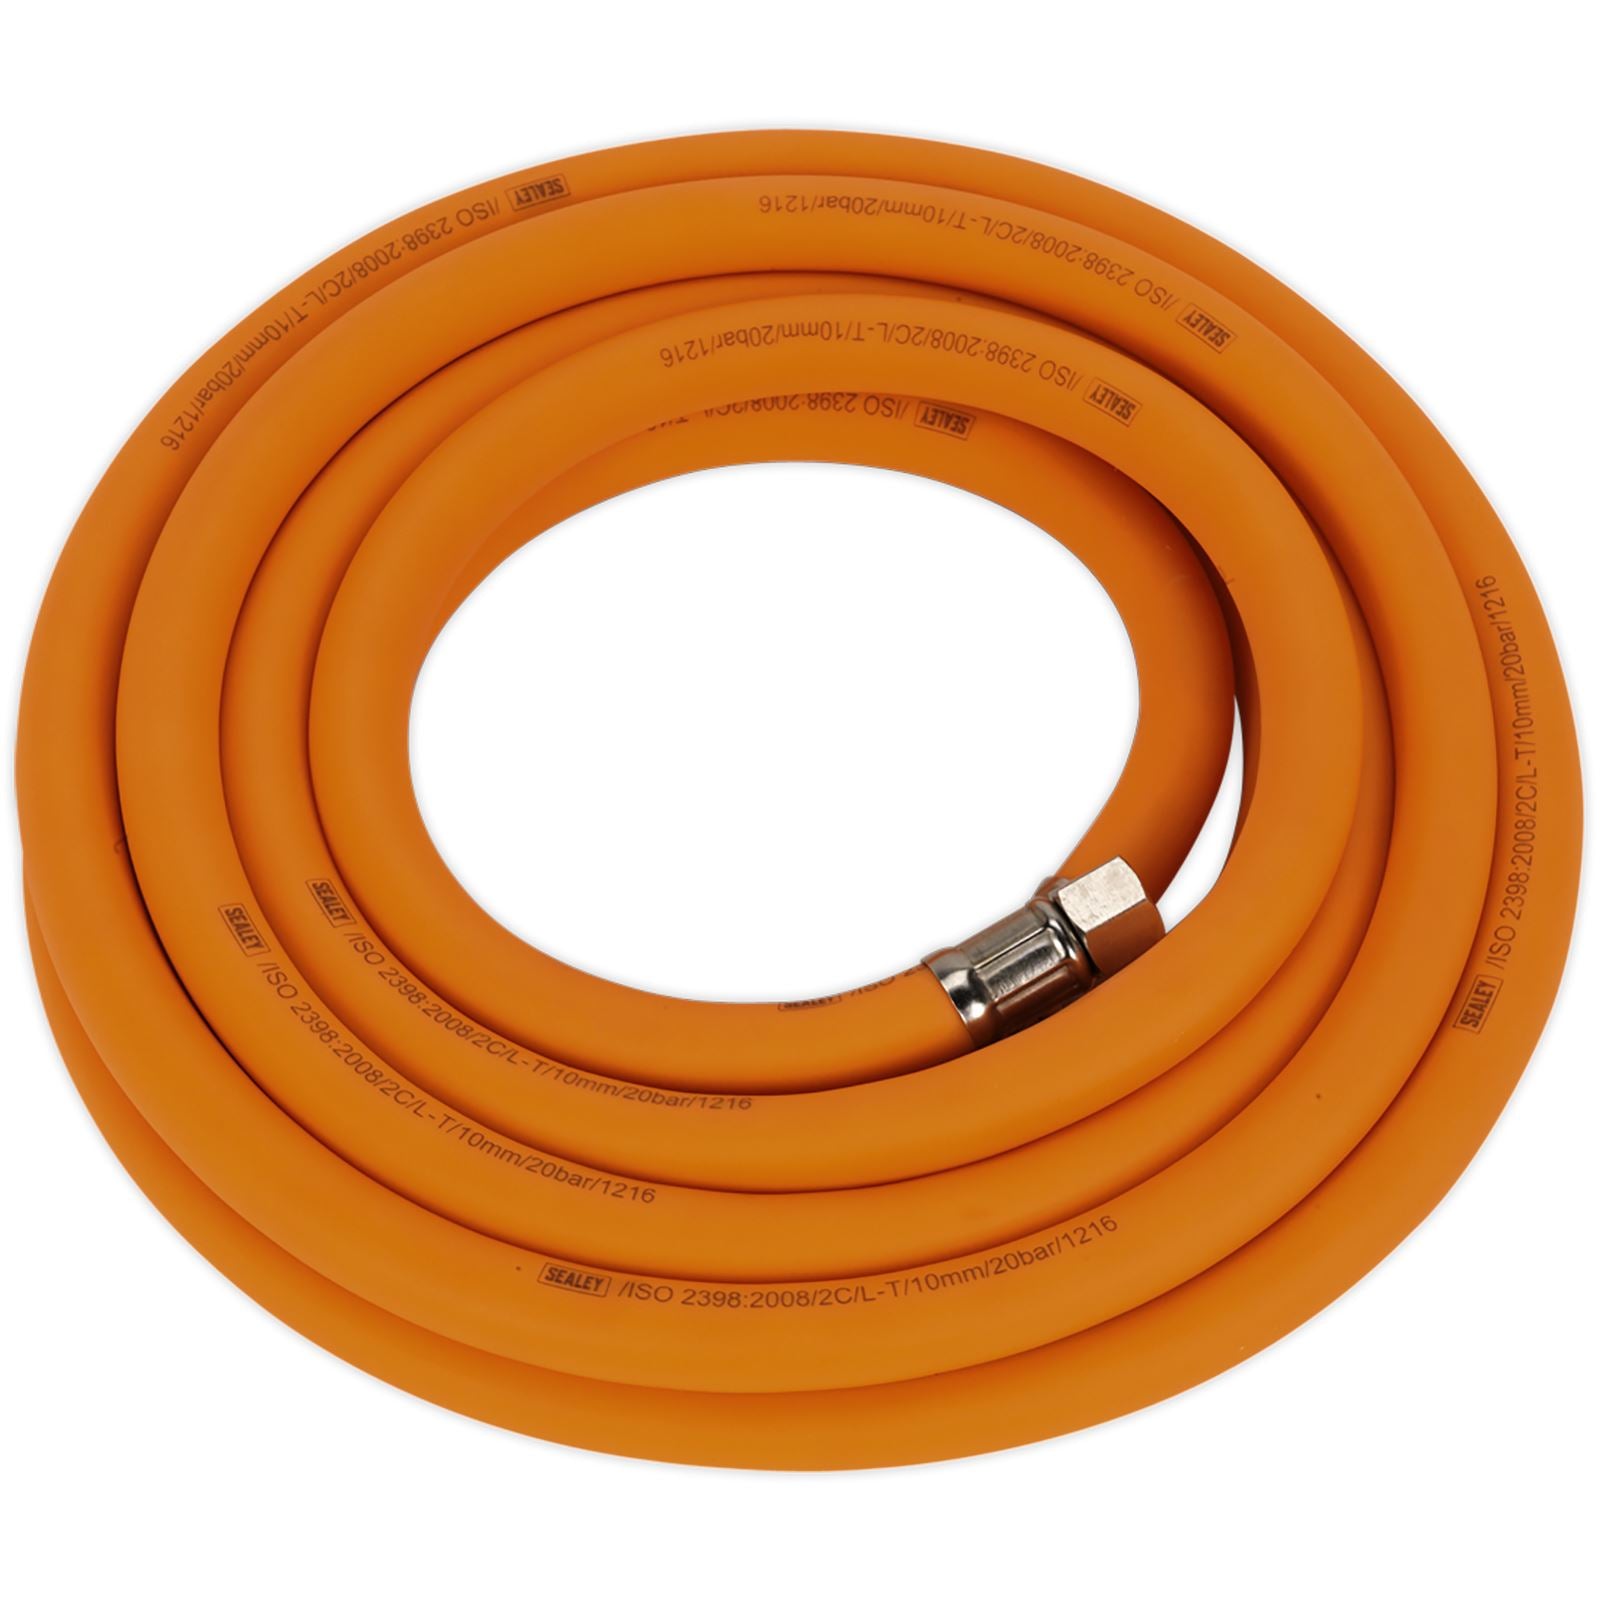 Sealey 5m x Ø10mm Hybrid High Visibility Air Hose with 1/4" BSP Unions